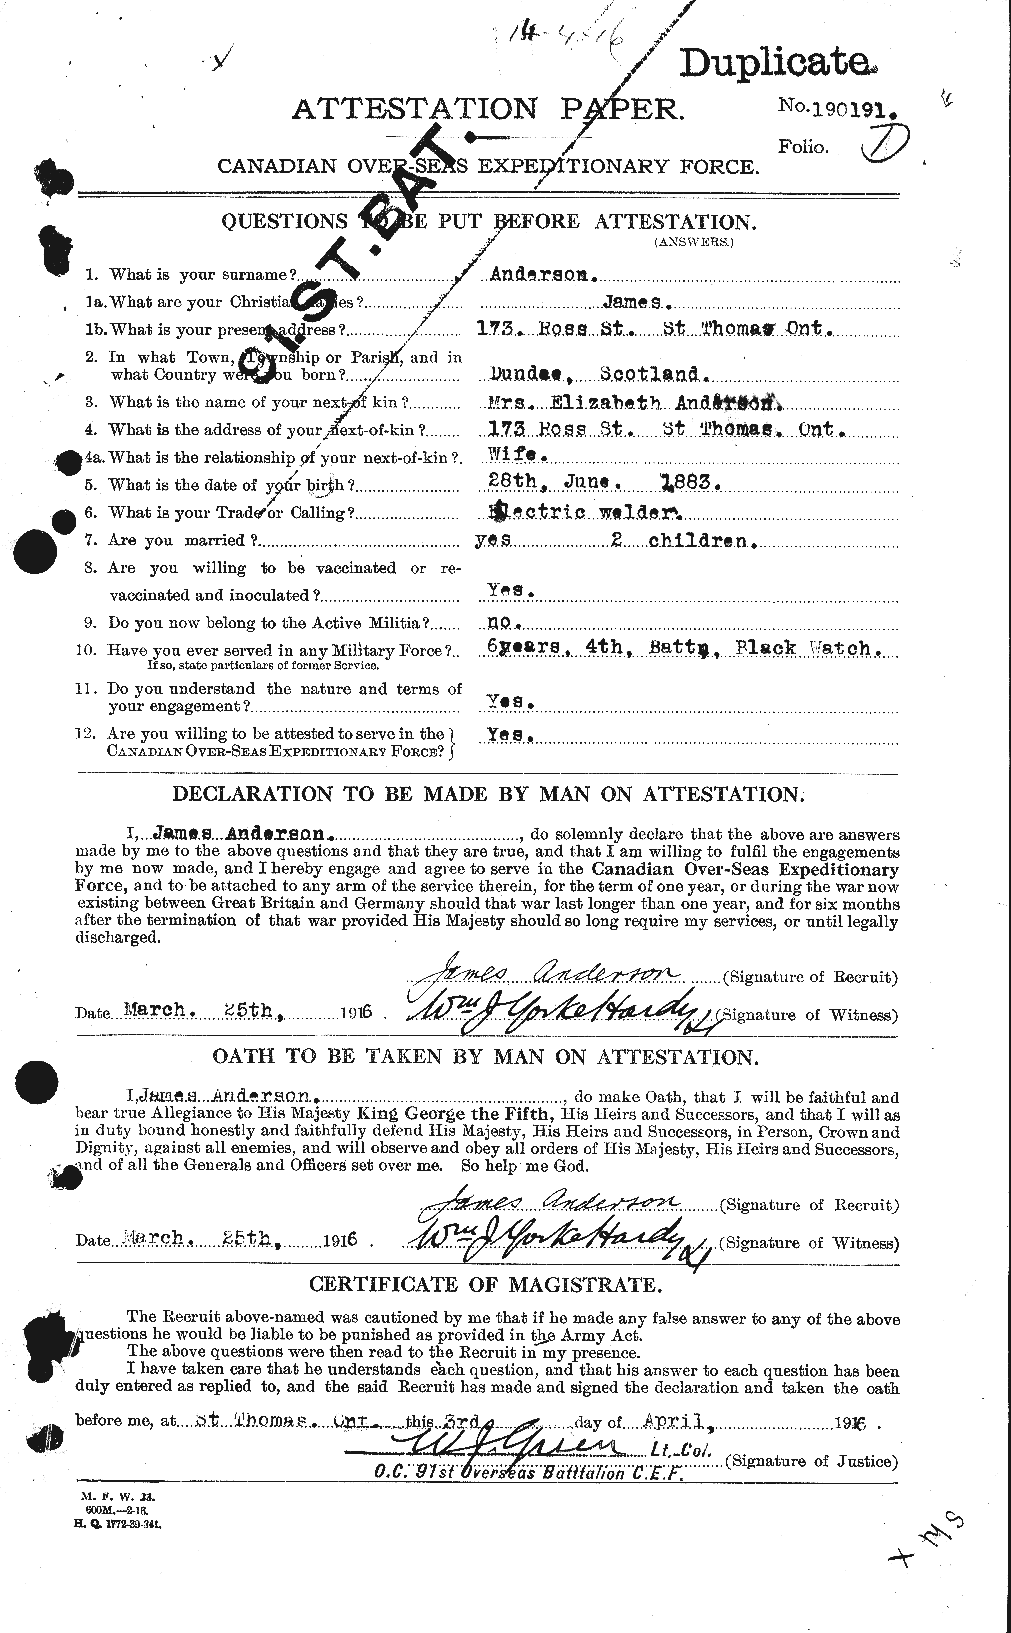 Personnel Records of the First World War - CEF 207906a